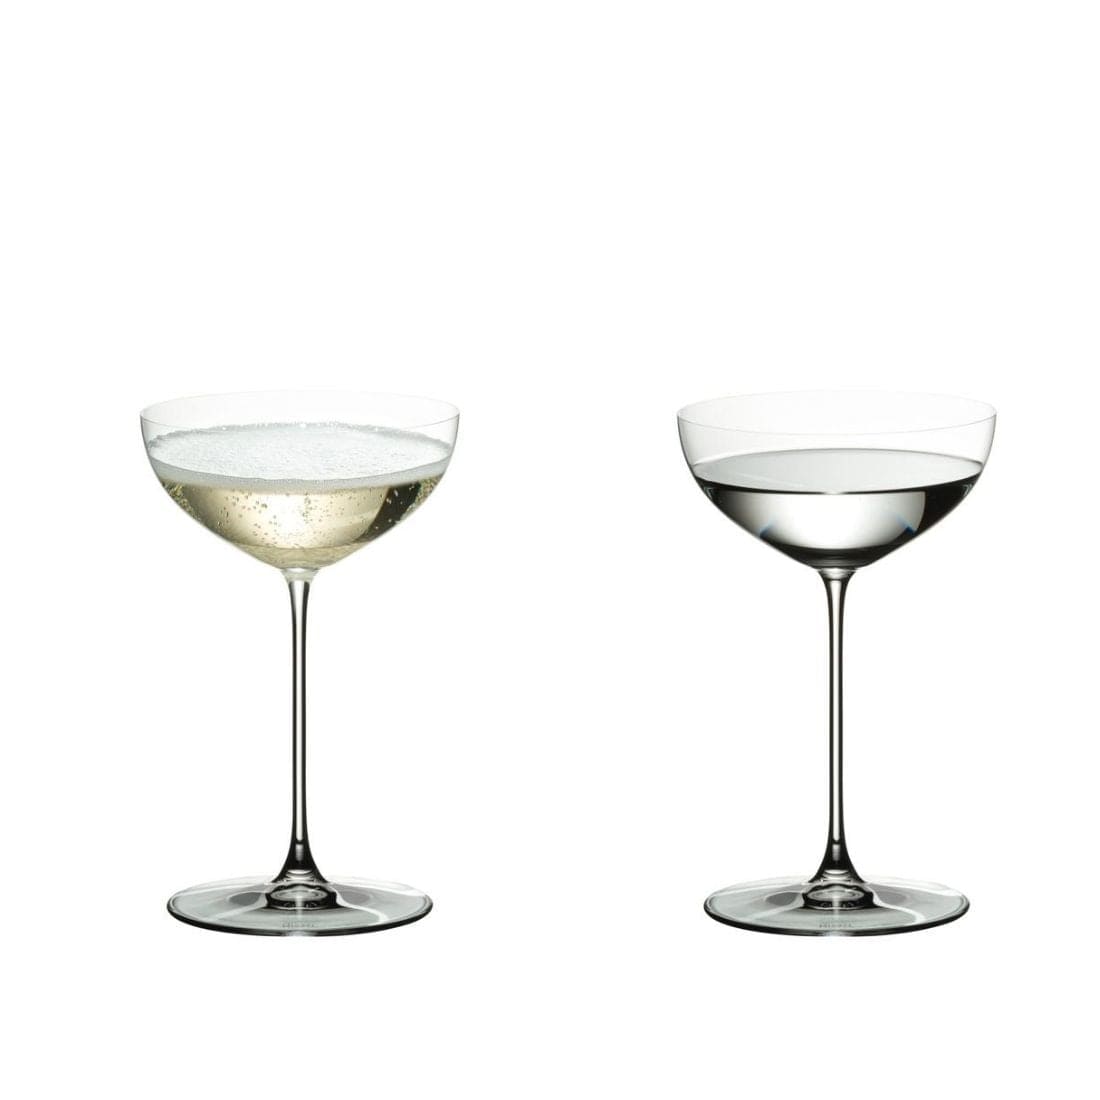 Riedel Veritas - Coupe / Cocktail Glasses (2 Pack)